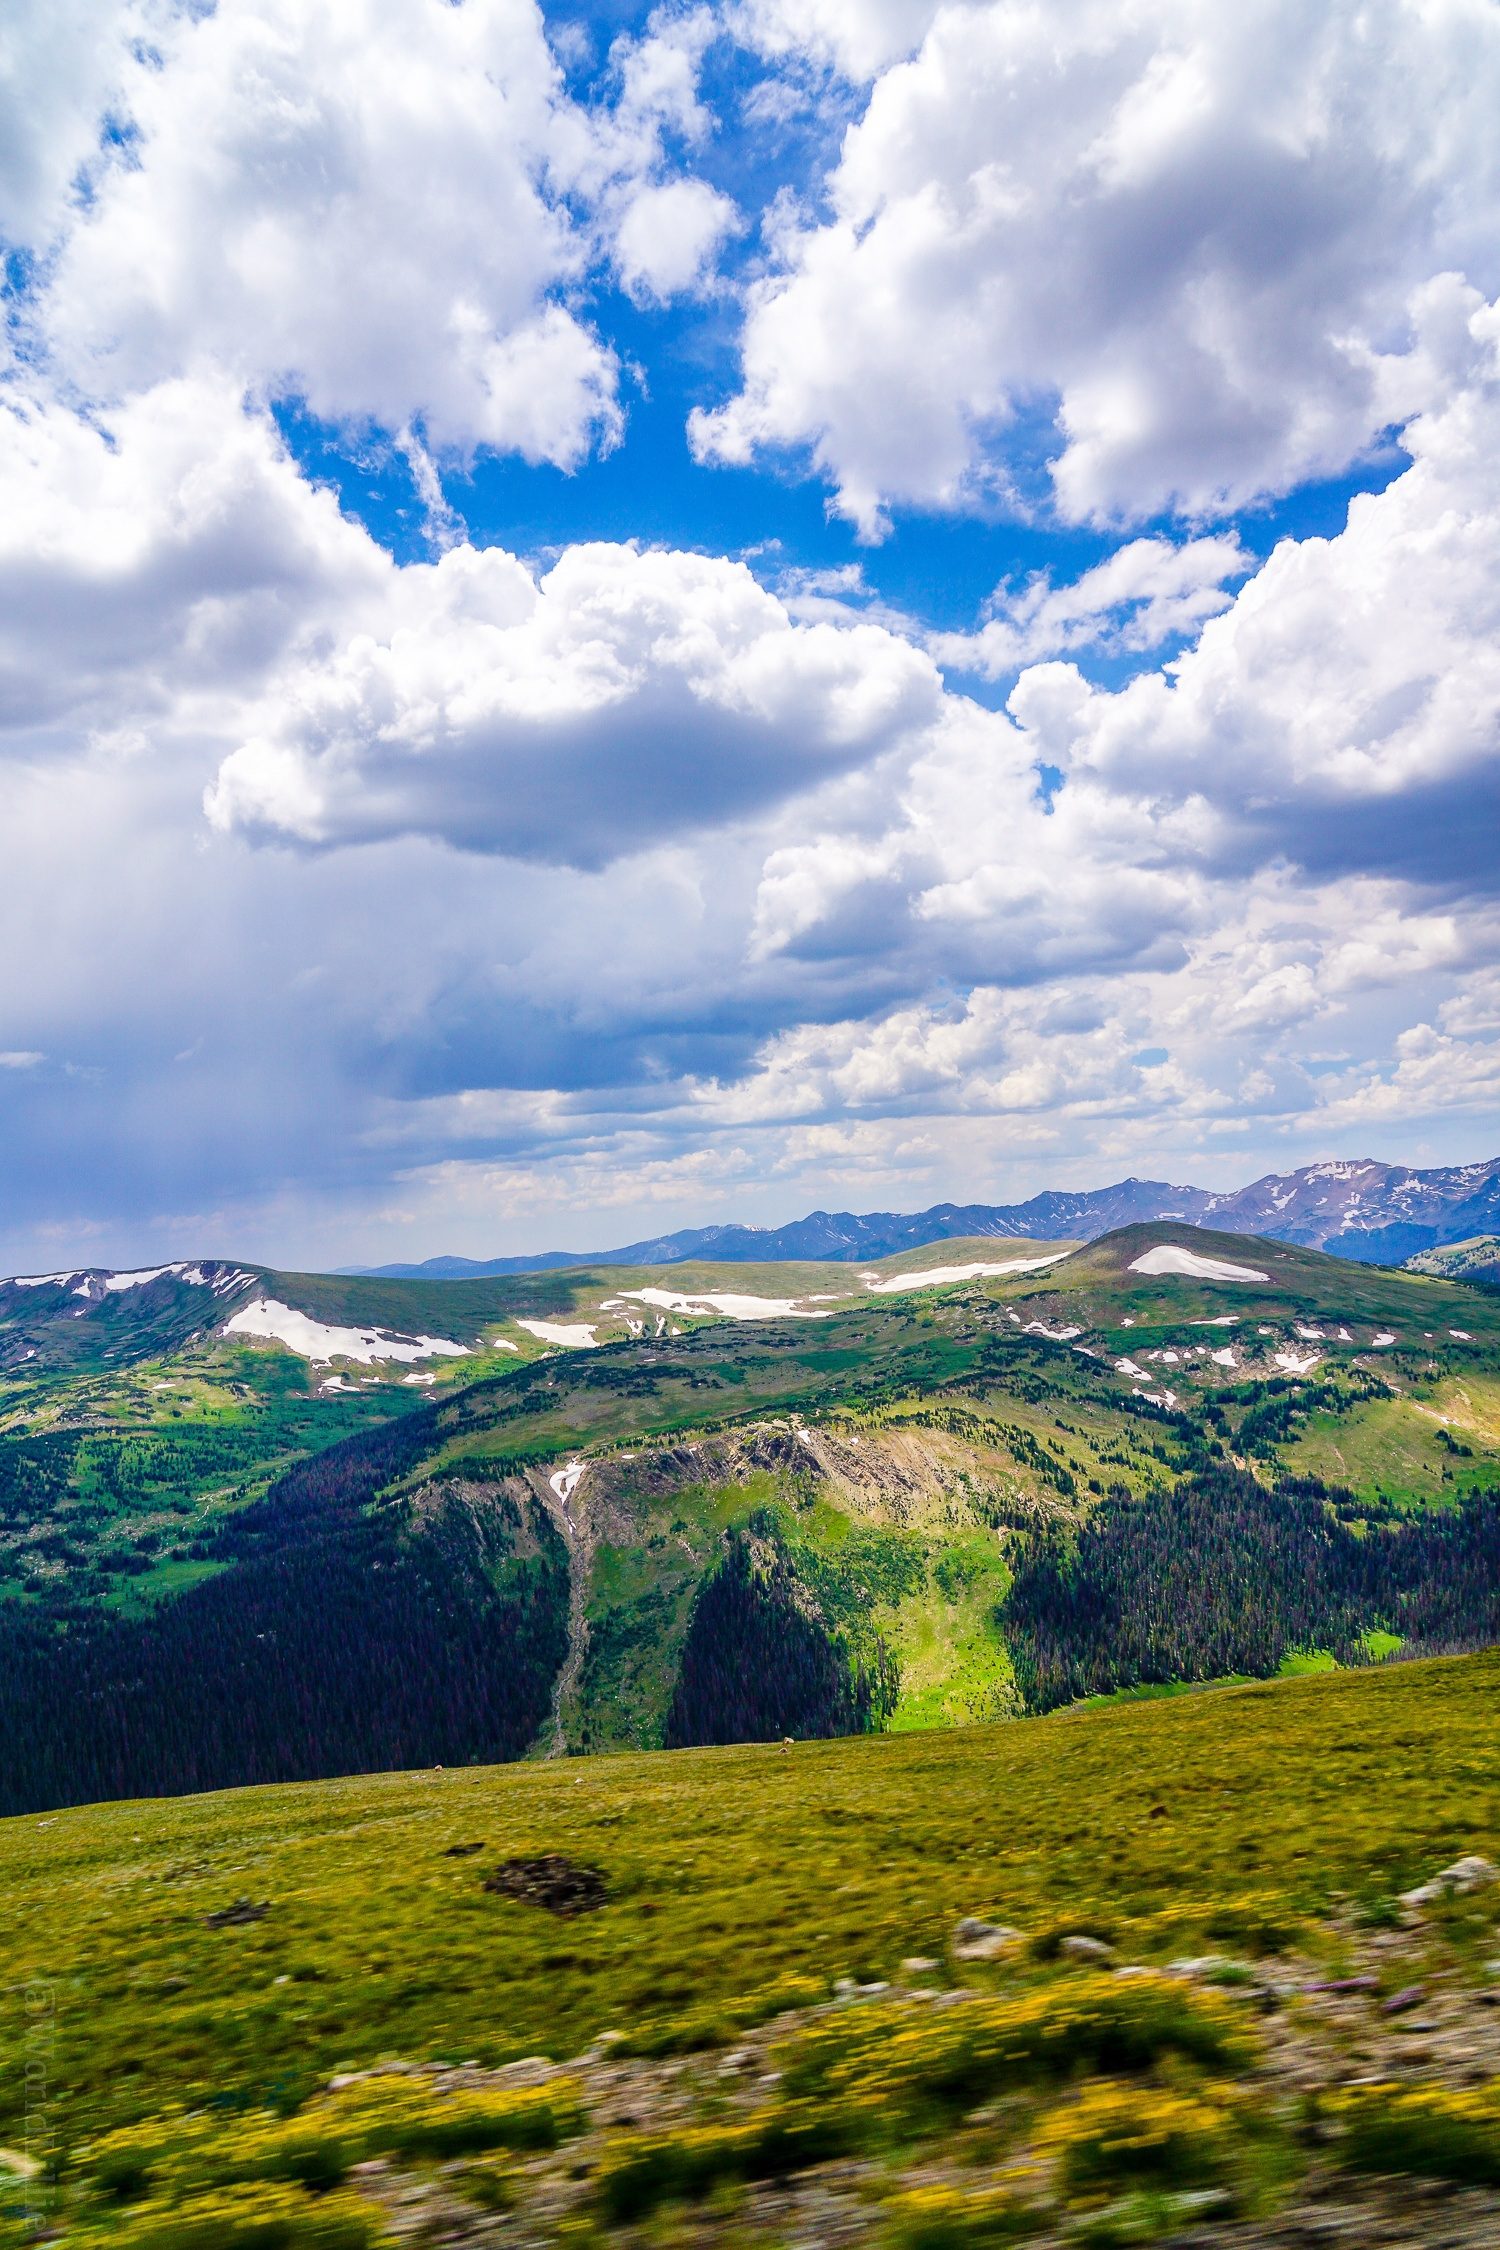 Visit Rocky Mountain National Park, CO! Tips on RMNP Colorado Mountains day trip itinerary by car: Trail Ridge Road, Alpine Visitor Center, & Sprague Lake hike. #colorado #rmnp #rockymountains #hiking #nationalparks